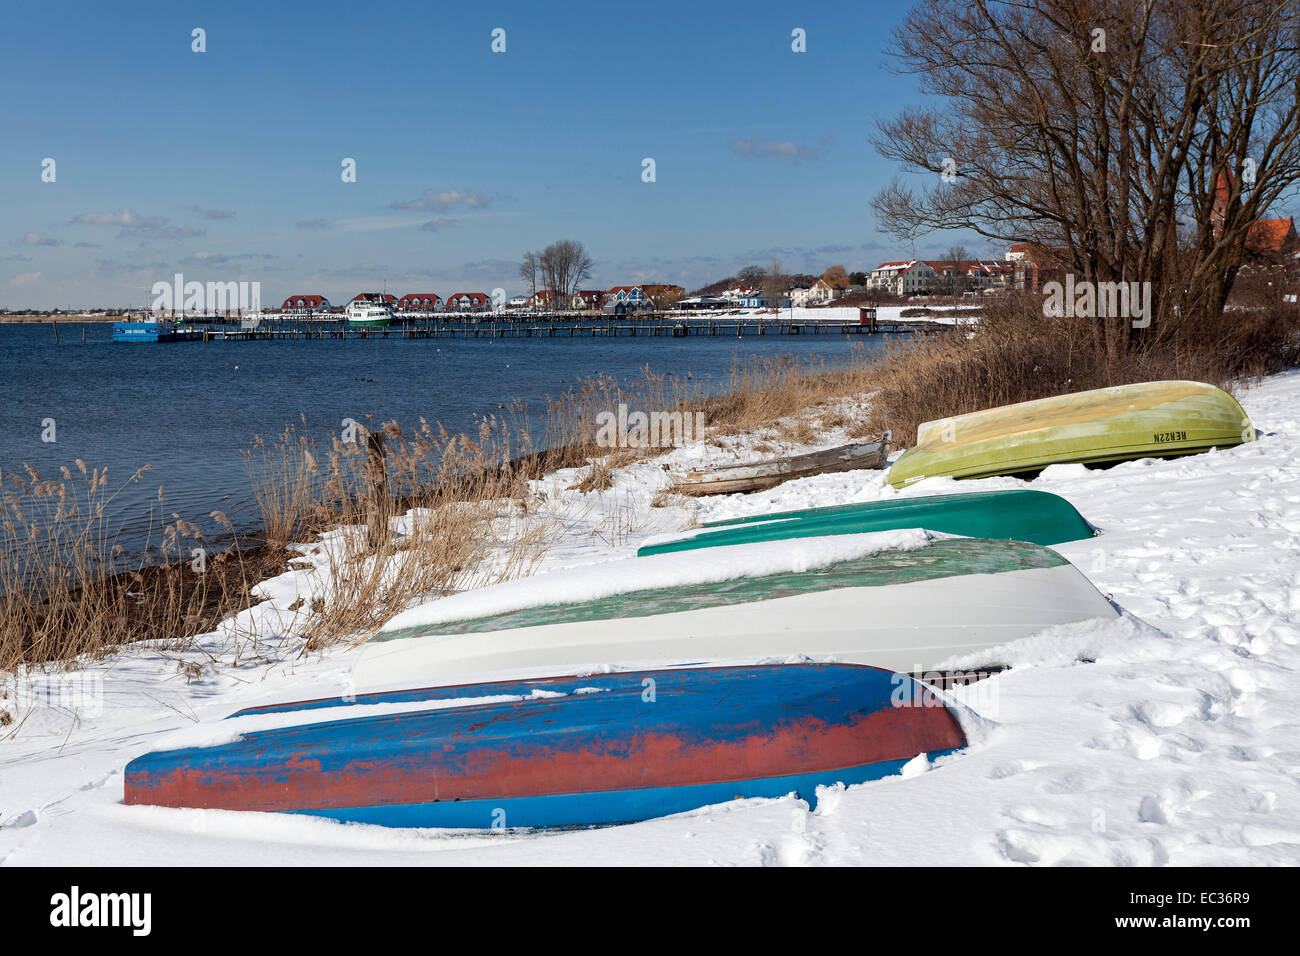 Boats in the snow on the shore, behind Rerik, Gulf of Mecklenburg, Mecklenburg, Baltic Sea, Germany Stock Photo